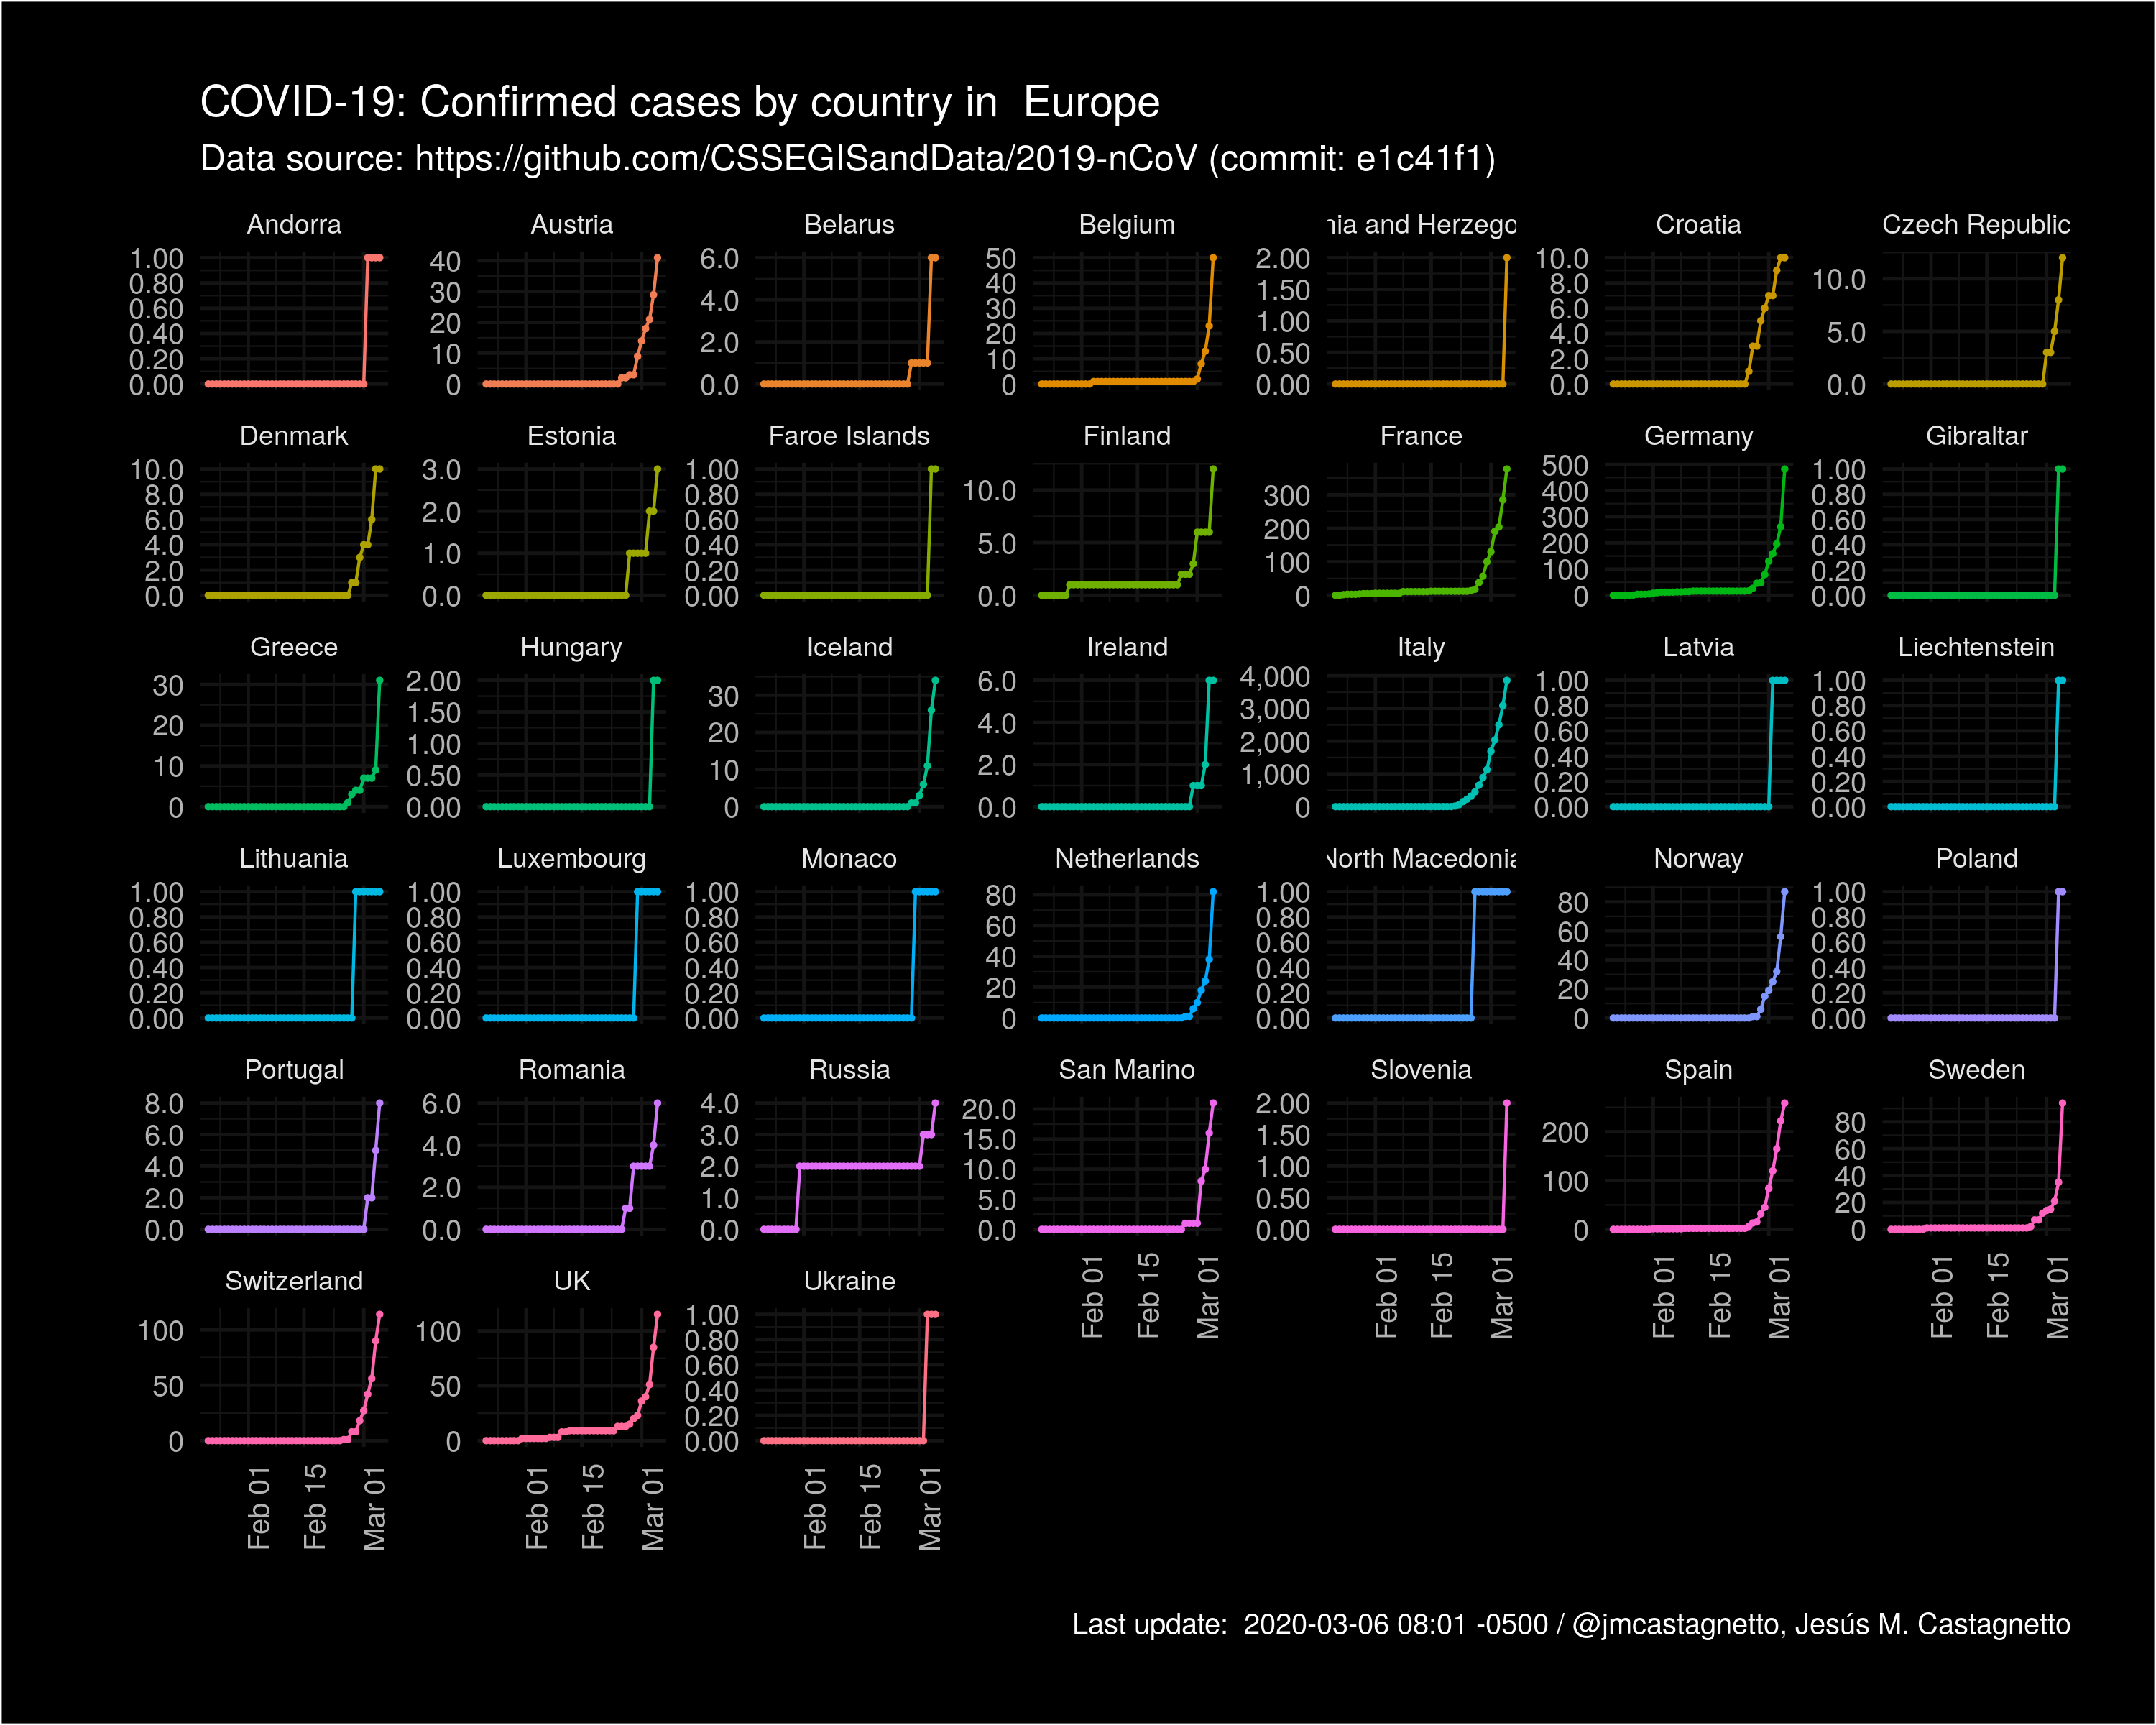 COVID-19 Confirmed cases by country (Europe)